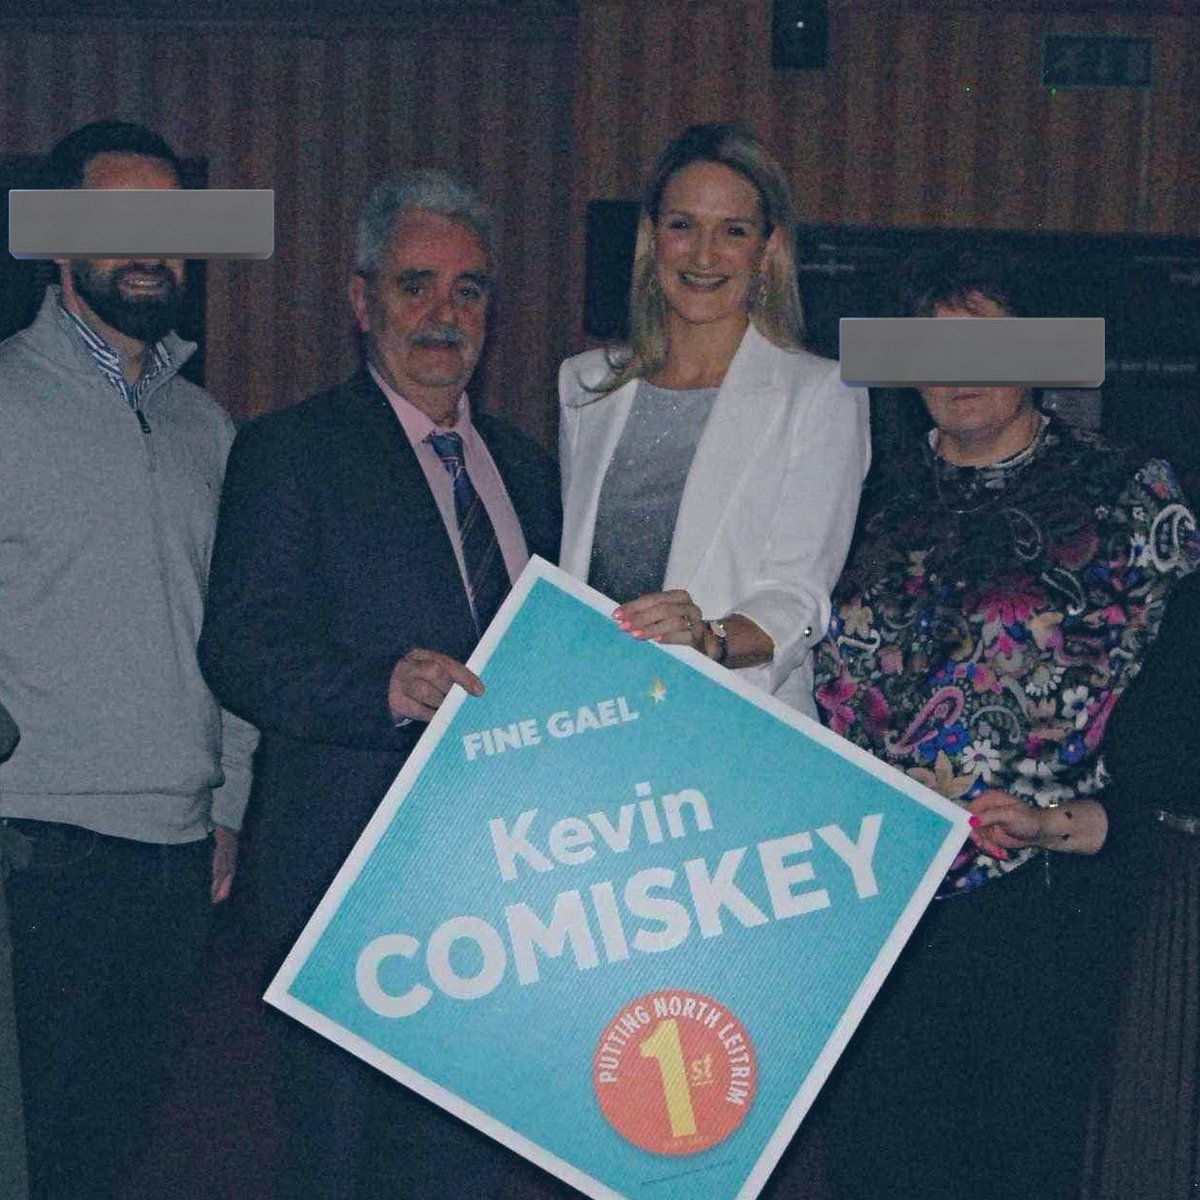 Ireland’s Minister for Justice launches convicted criminal’s election campaign. 

Fine Gael politician Kevin Comiskey has 15 convictions including ones for failing to make a tax return, drunk driving and illegally using green diesel. Welcome to FFG’s crony island.